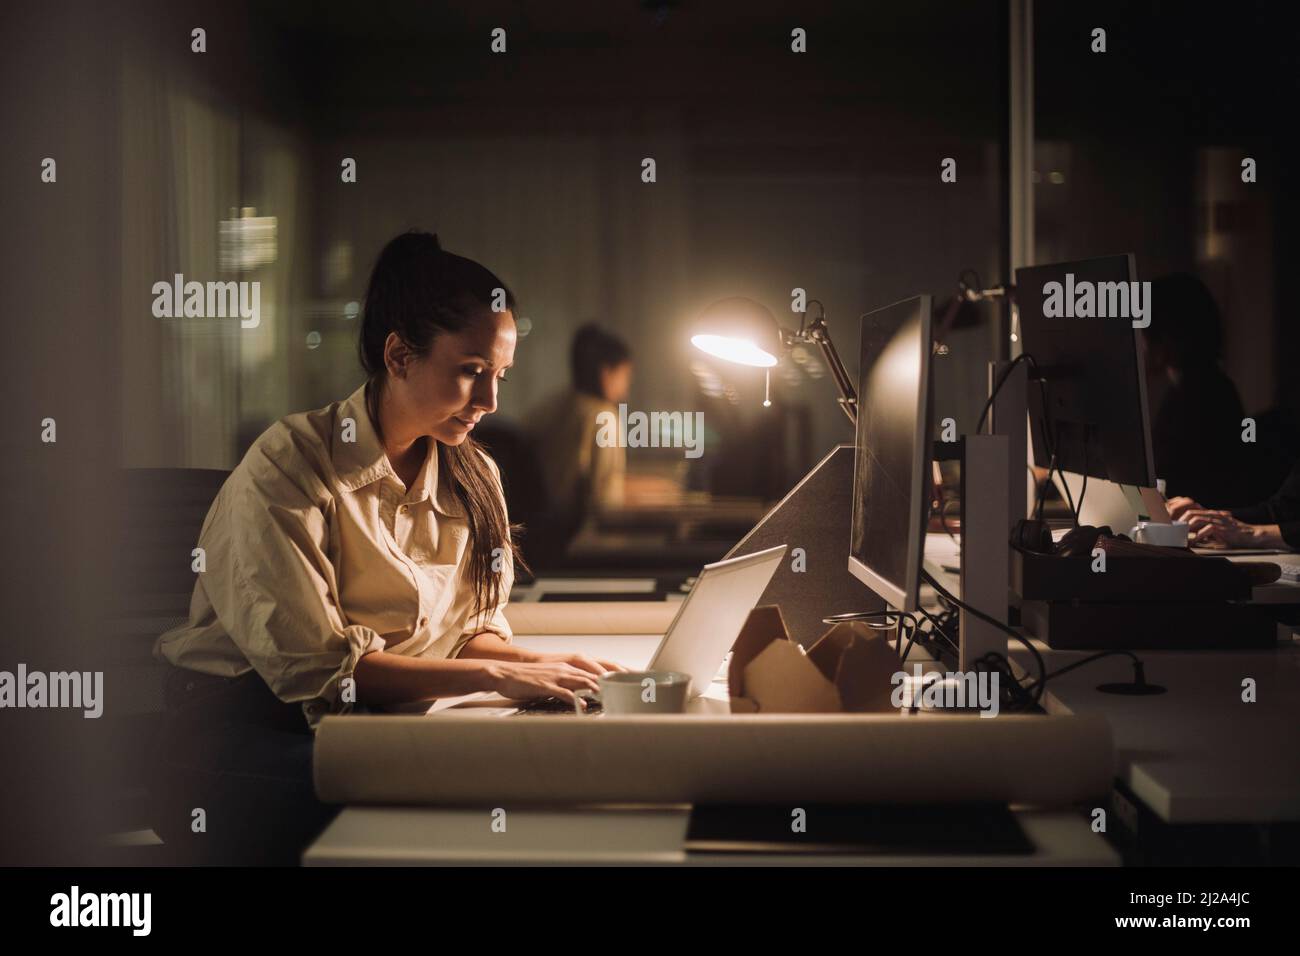 Businesswoman concentrating while working late on laptop in office Stock Photo